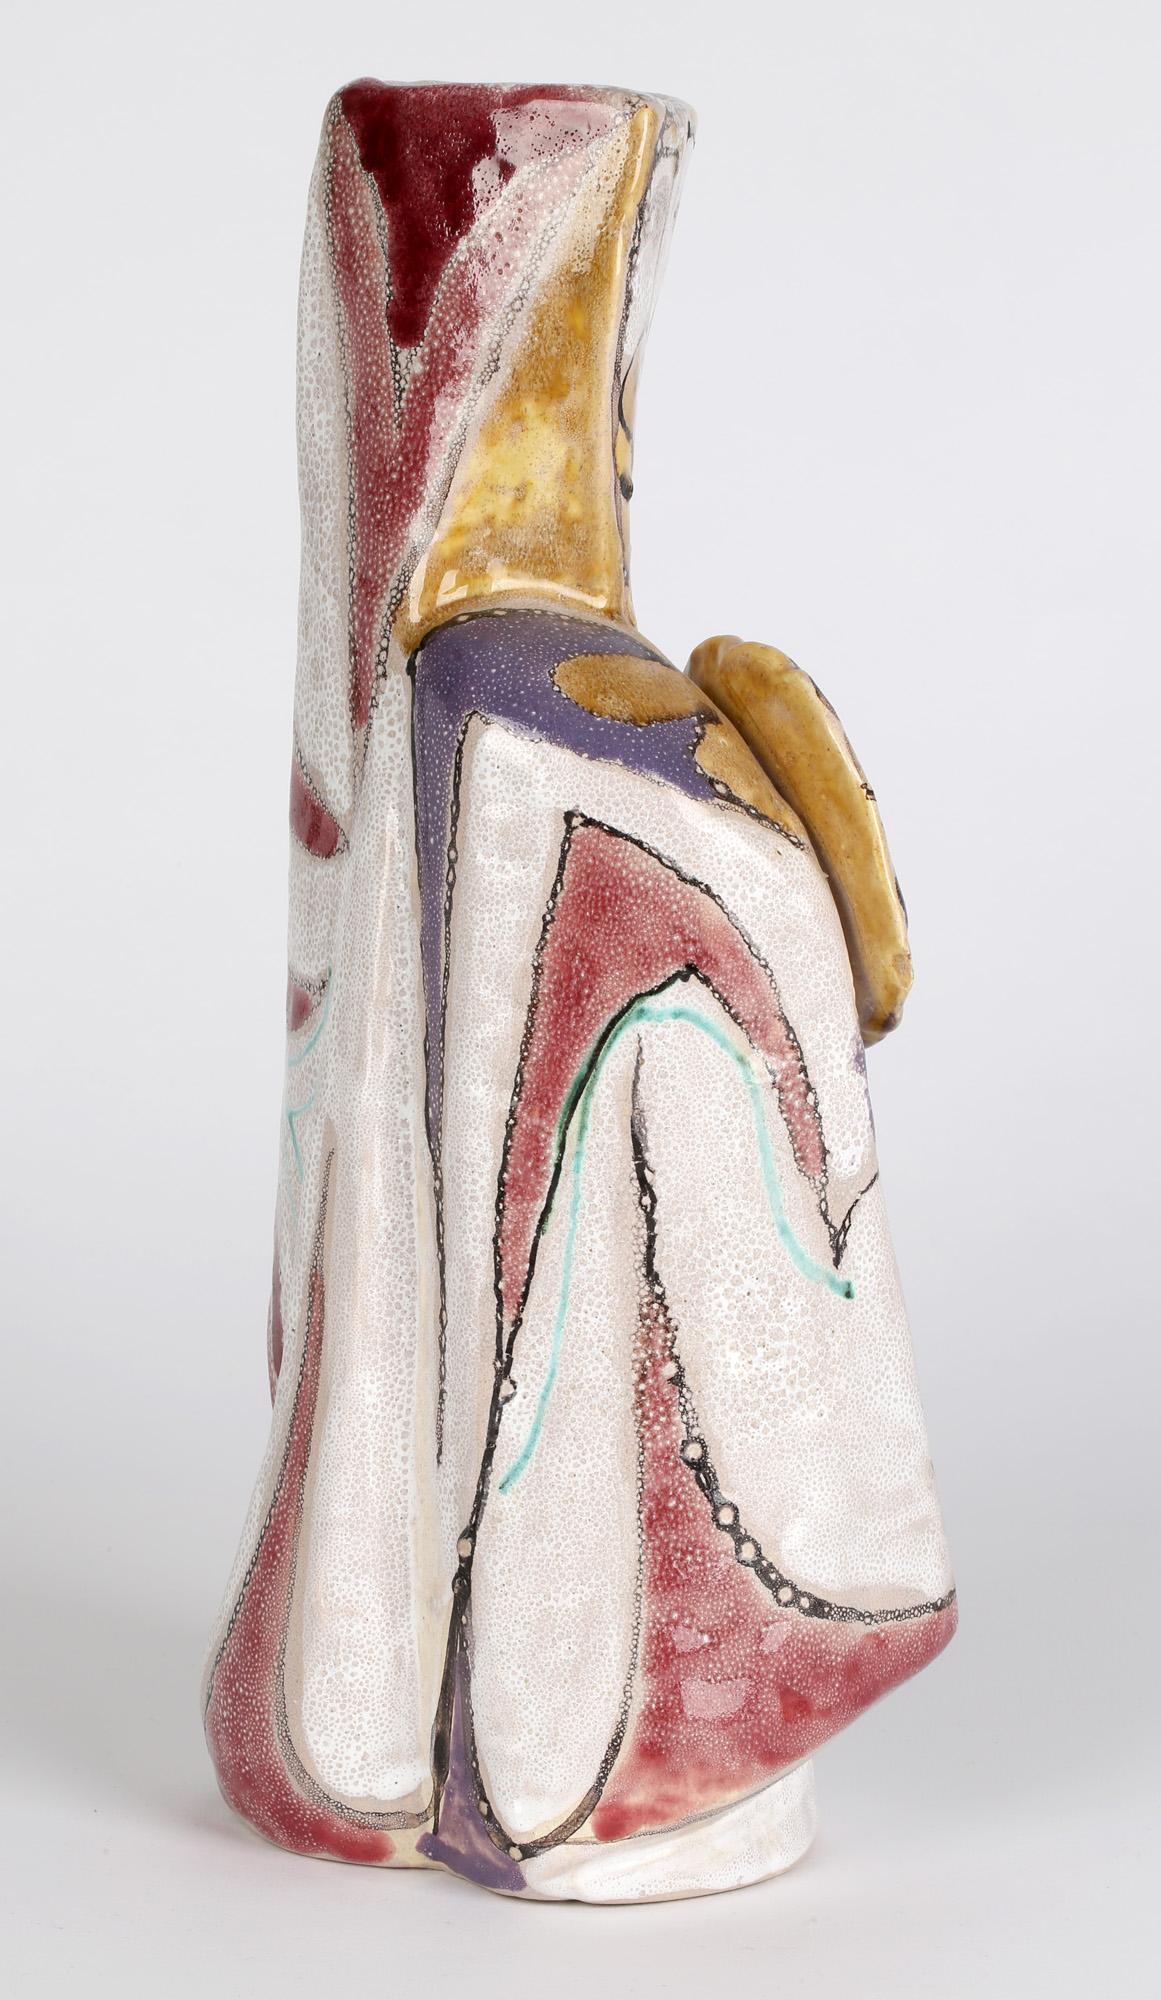 A large and stunning Italian hand painted abstract figurative sculptural 'Guerriero' (warrior or fighter) ceramic vase by Elio Schiavon (1925-2004) dating from around 1960. This very stylized hand crafted vase portrays a figure holding a shield and